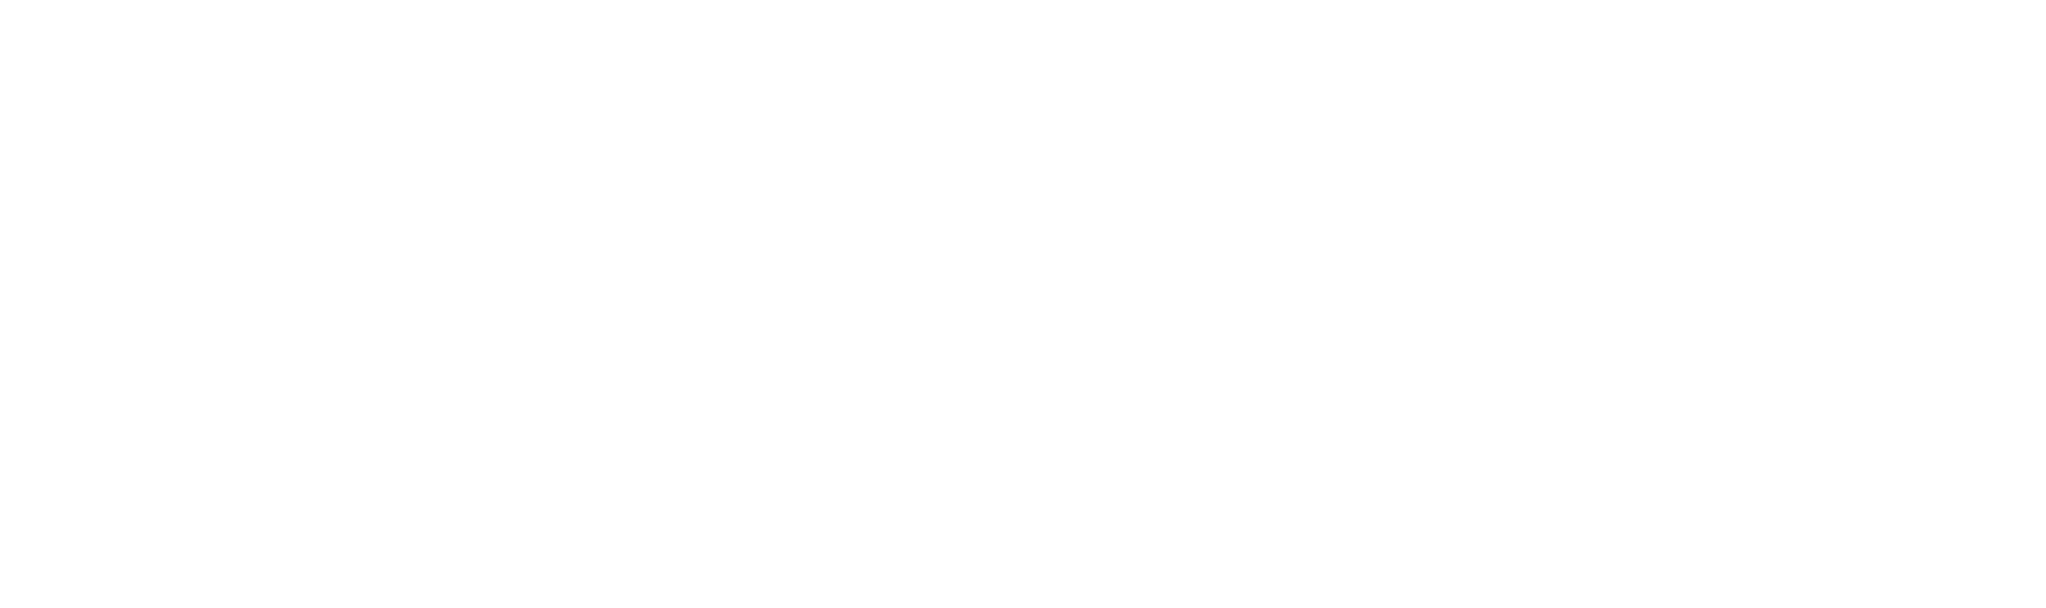 Large wavy text reading "THE WORLD IS BETTER WITH YOU IN IT."